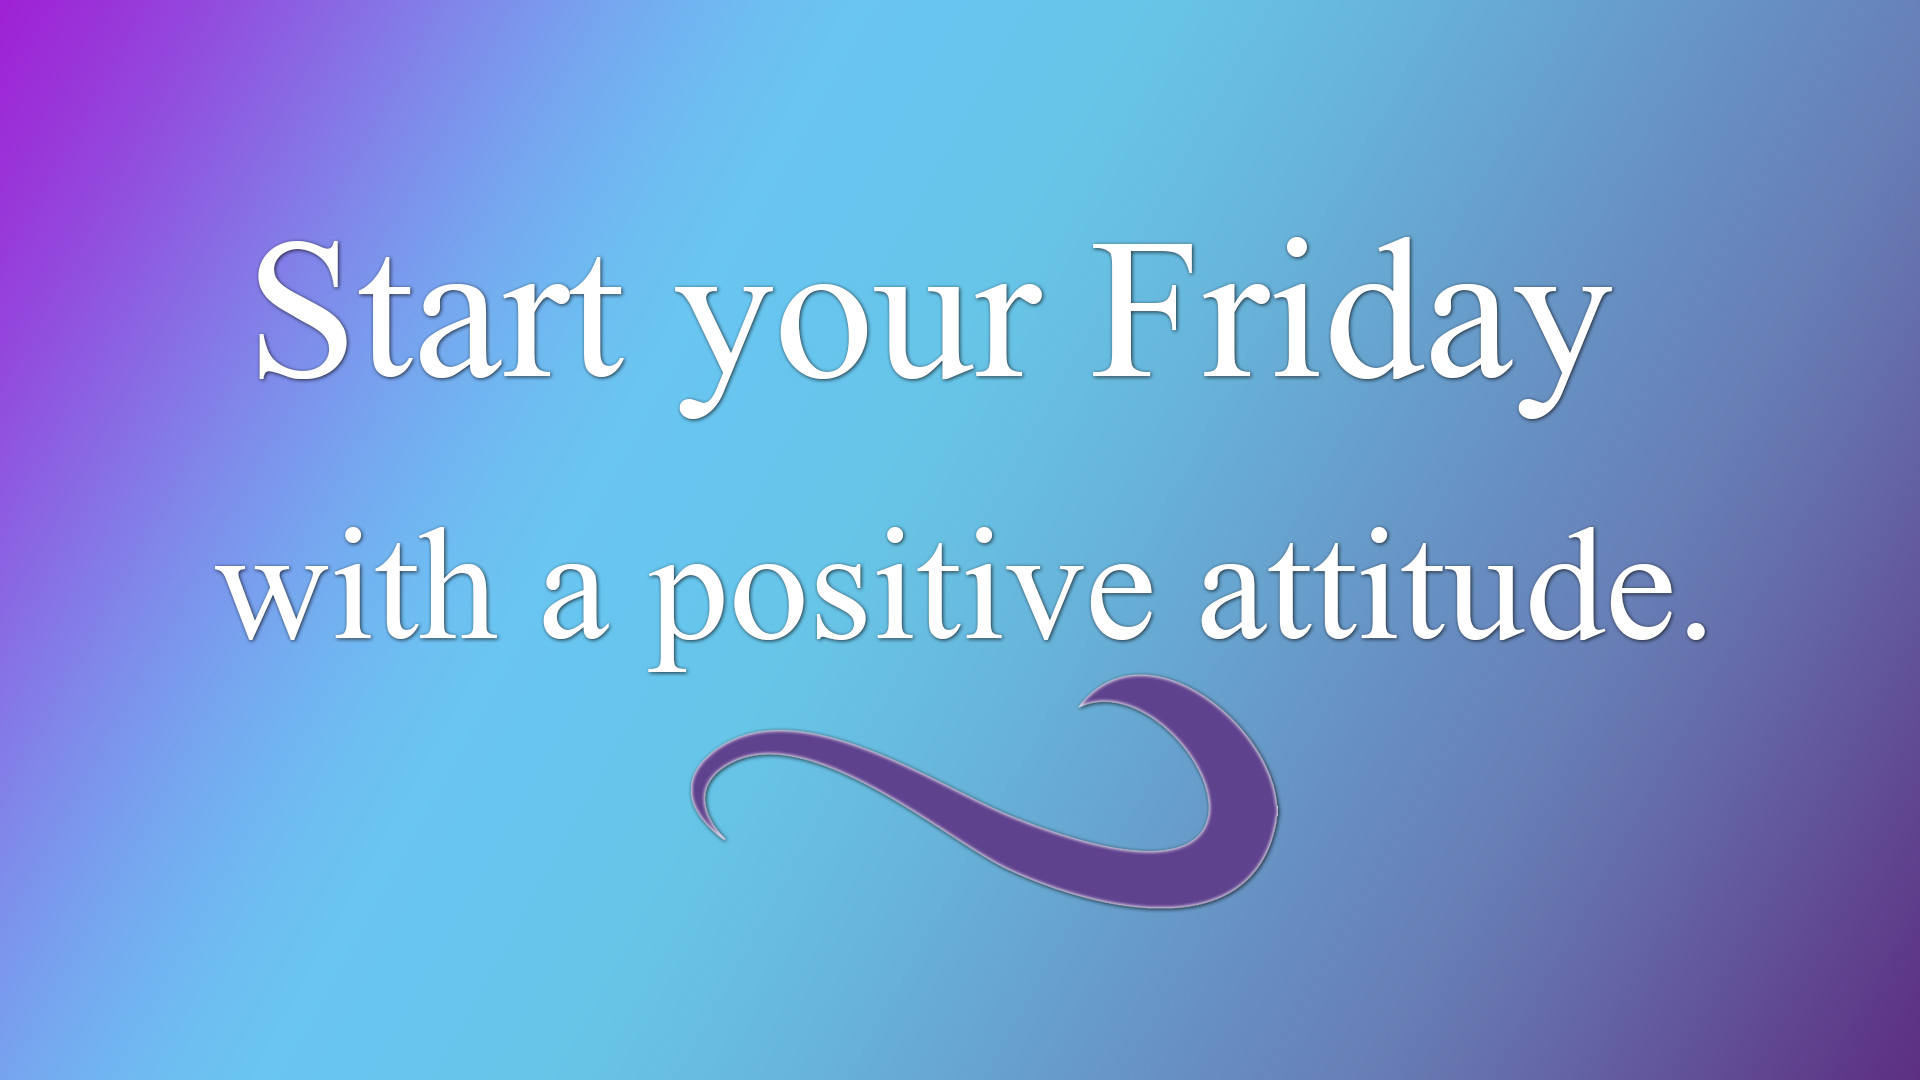 Start Your Friday With A Positive Attitude HD Inspirational Wallpaper